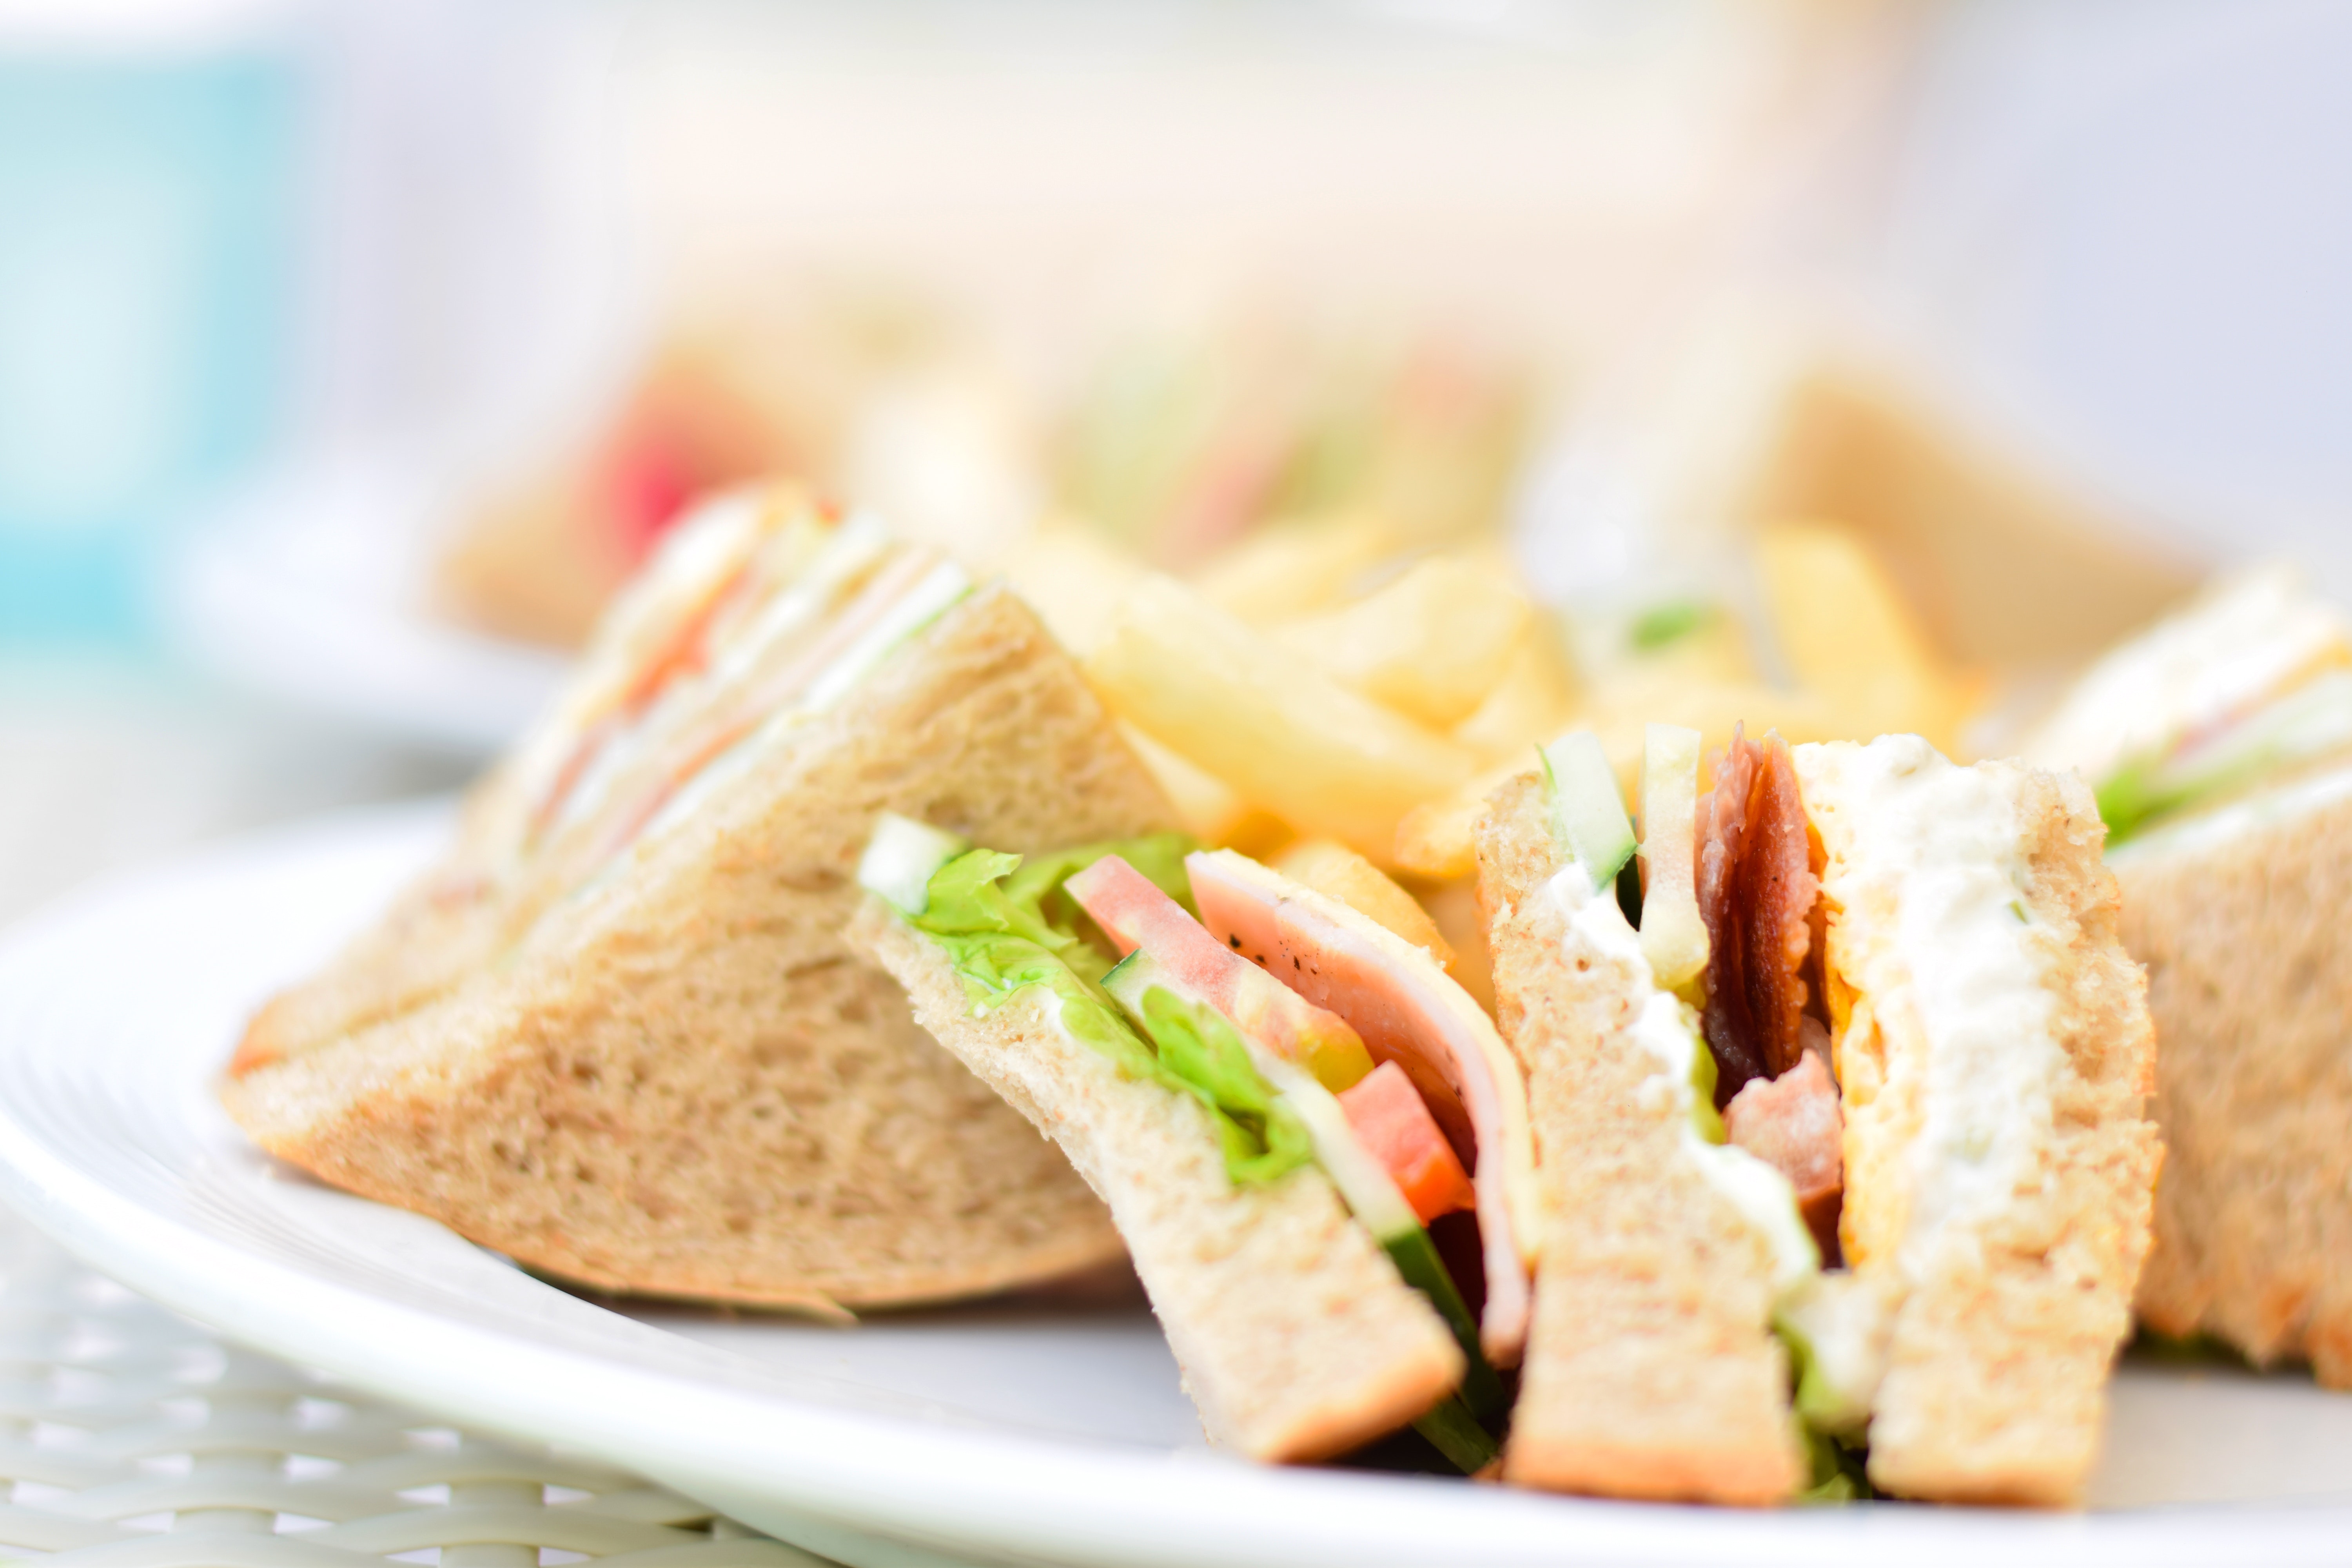 Selective focus photography of plate of sliced clubhouse sandwich